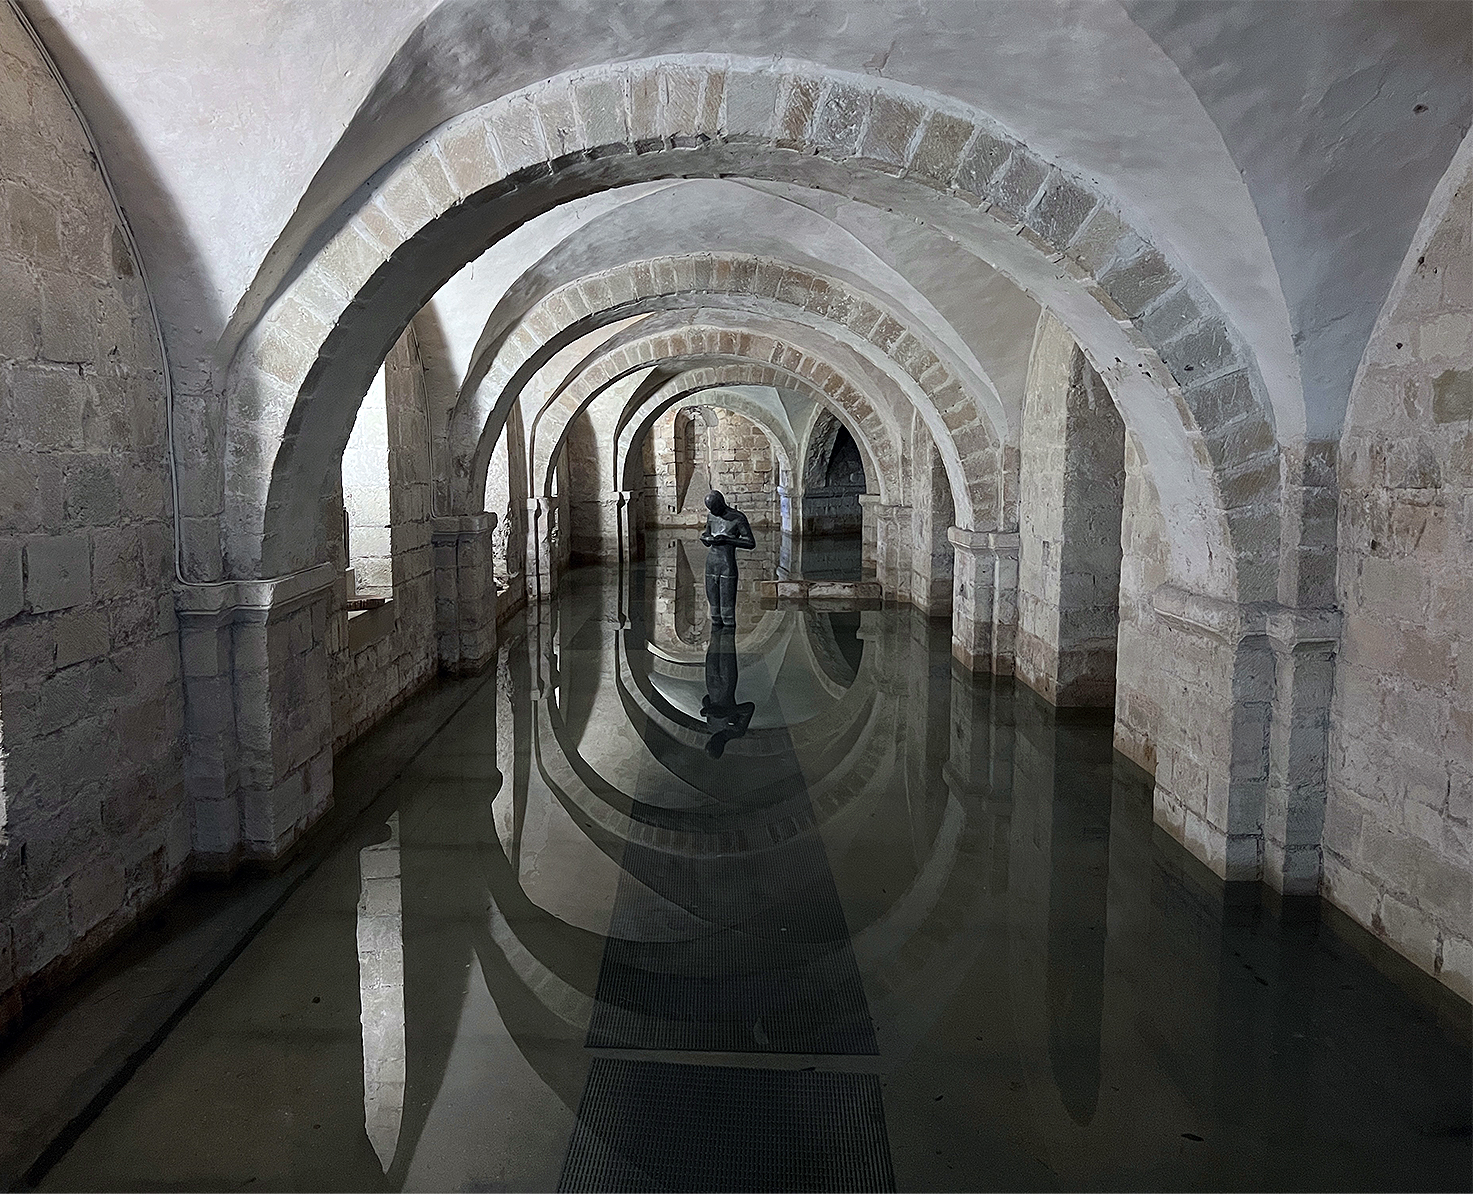 REFLECTIONS IN THE CRYPT